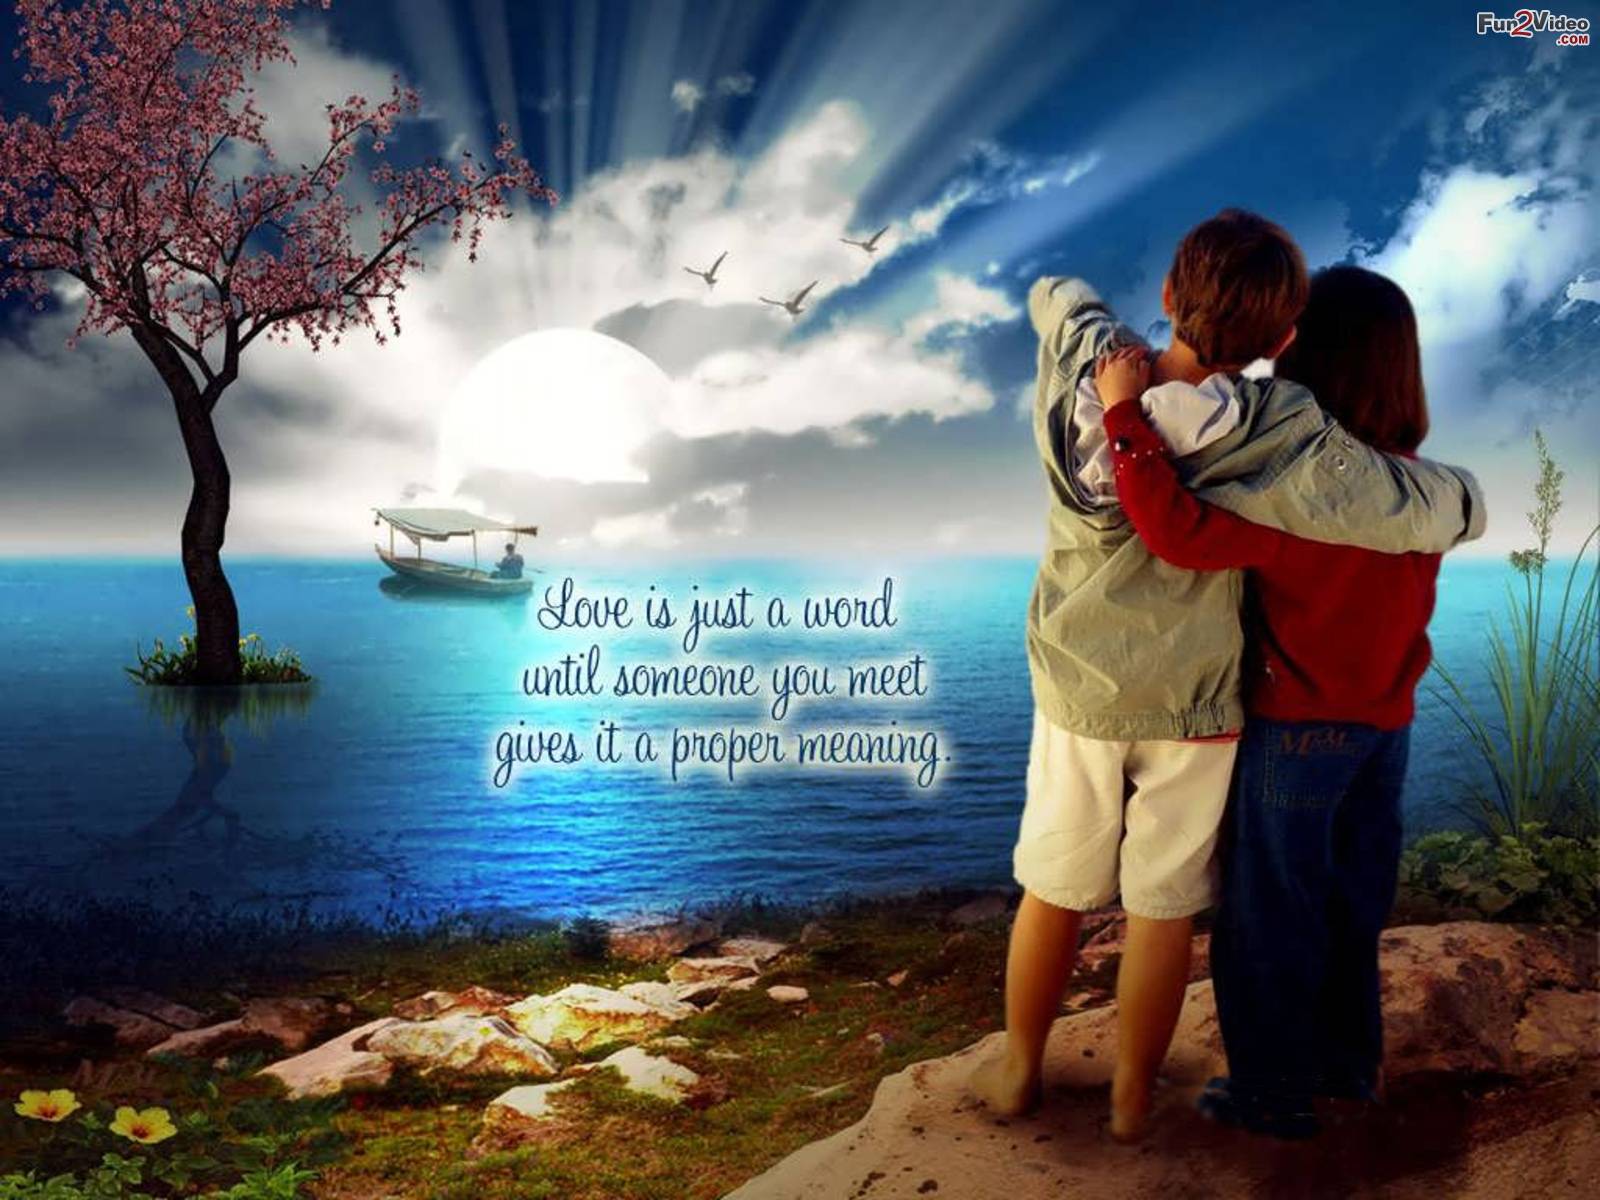 Love Wallpaper Of Romantic Couple With Quotes To Show